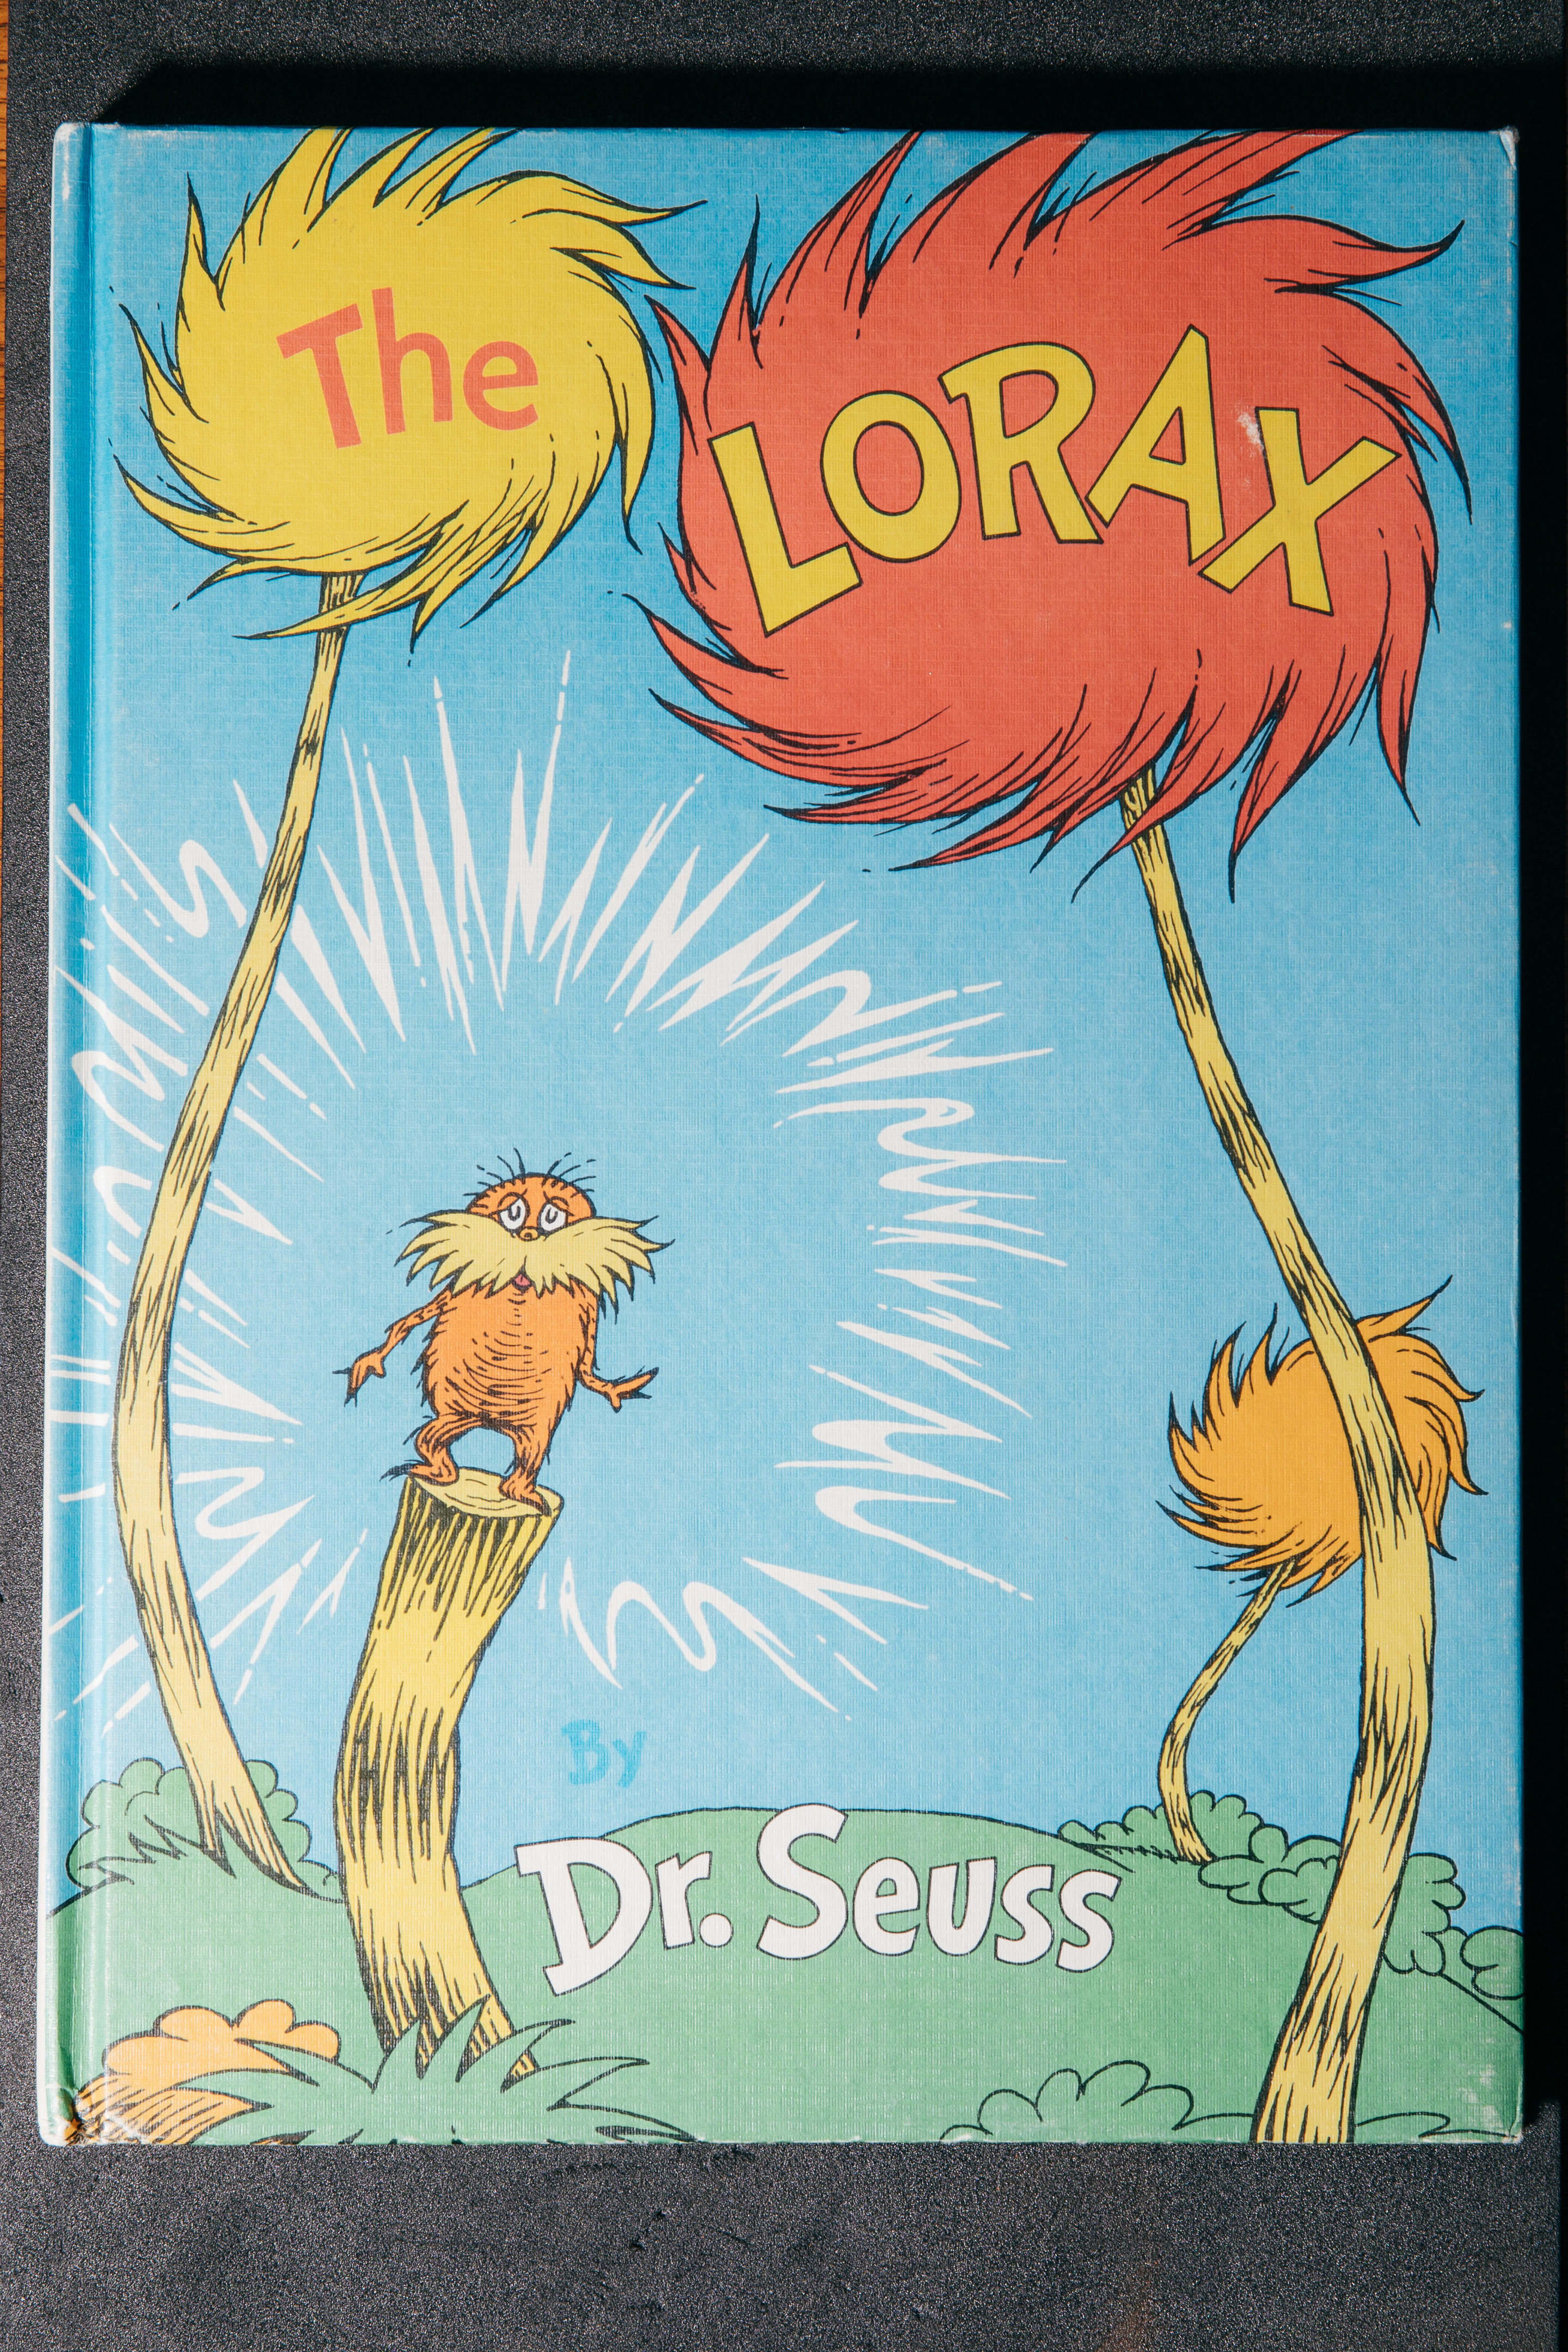 the lorax book trees